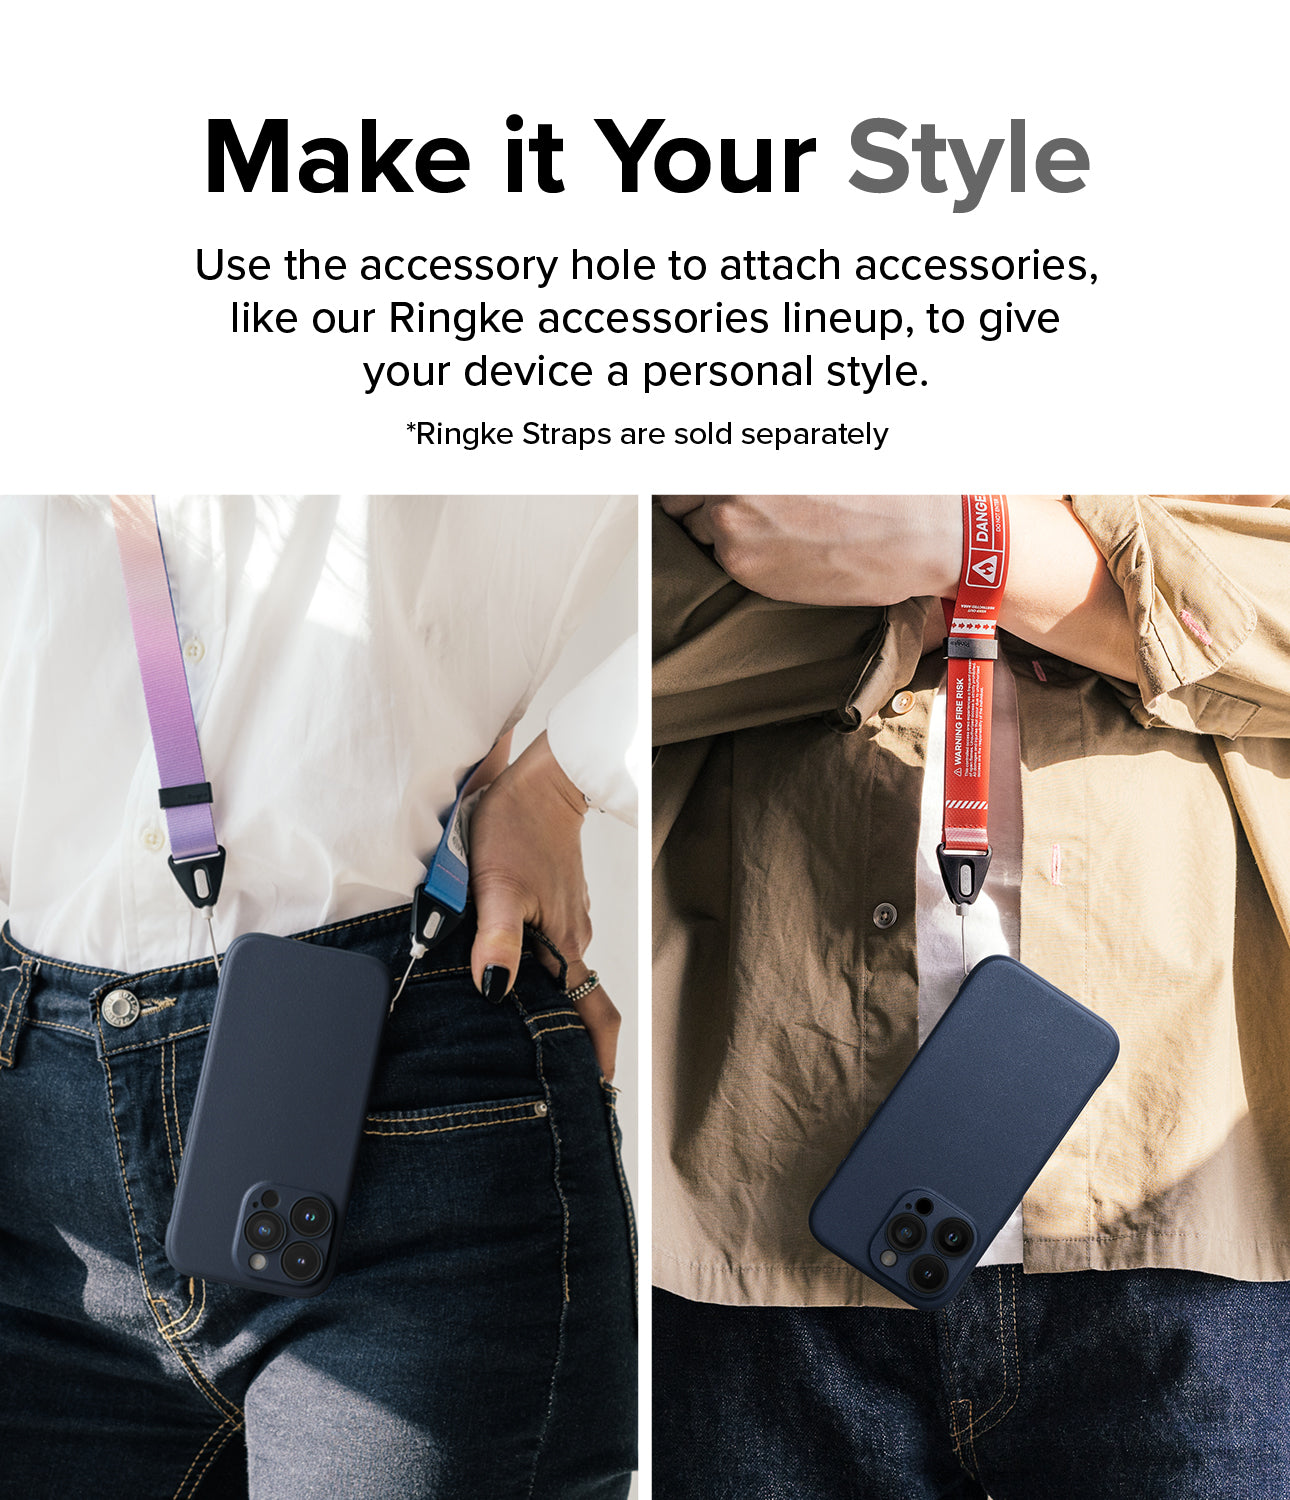 iPhone 15 Pro Max Case | Onyx - Navy - Make it Your Style. Use the accessory hole to attach accessories, like our RIngke accessories lineup, to give your device a personal style.